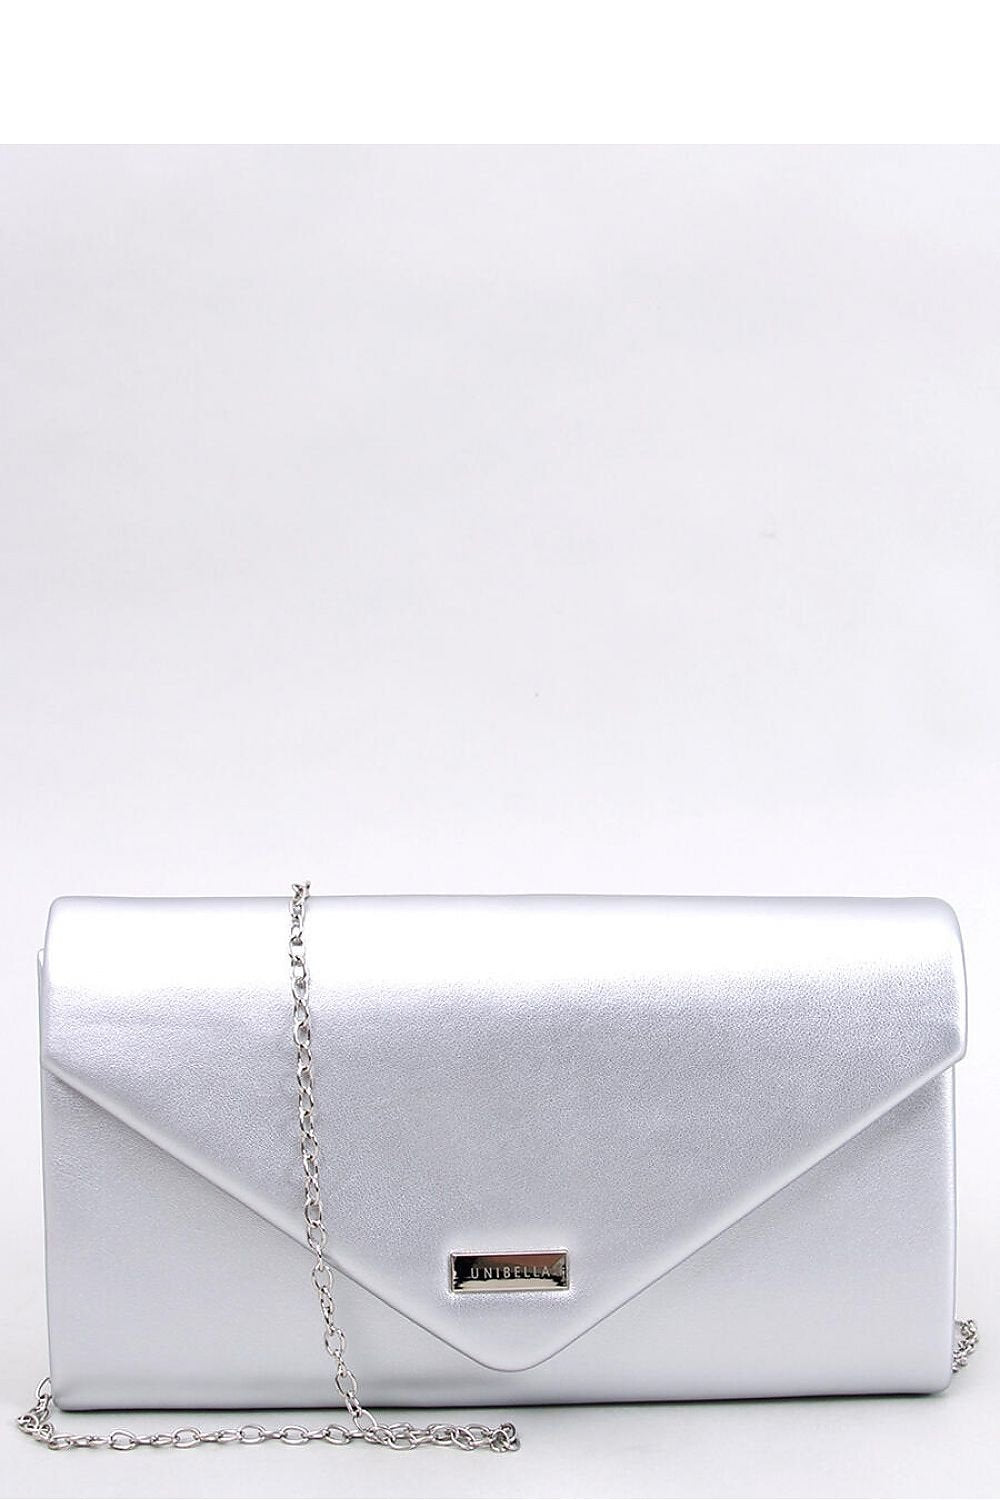 Envelope clutch bag - M&H FashionEnvelope clutch bagM&H FashionM&H Fashion192447_1116839one-size-fits-allEnvelope clutch bag InelloM&H FashionM&H FashionElegant handbag for women ? clutch bag. It can be carried in two ways ? in hand or on a silver chain attached to it. The unique beauty of the handbag lies in the claEnvelope clutch bag